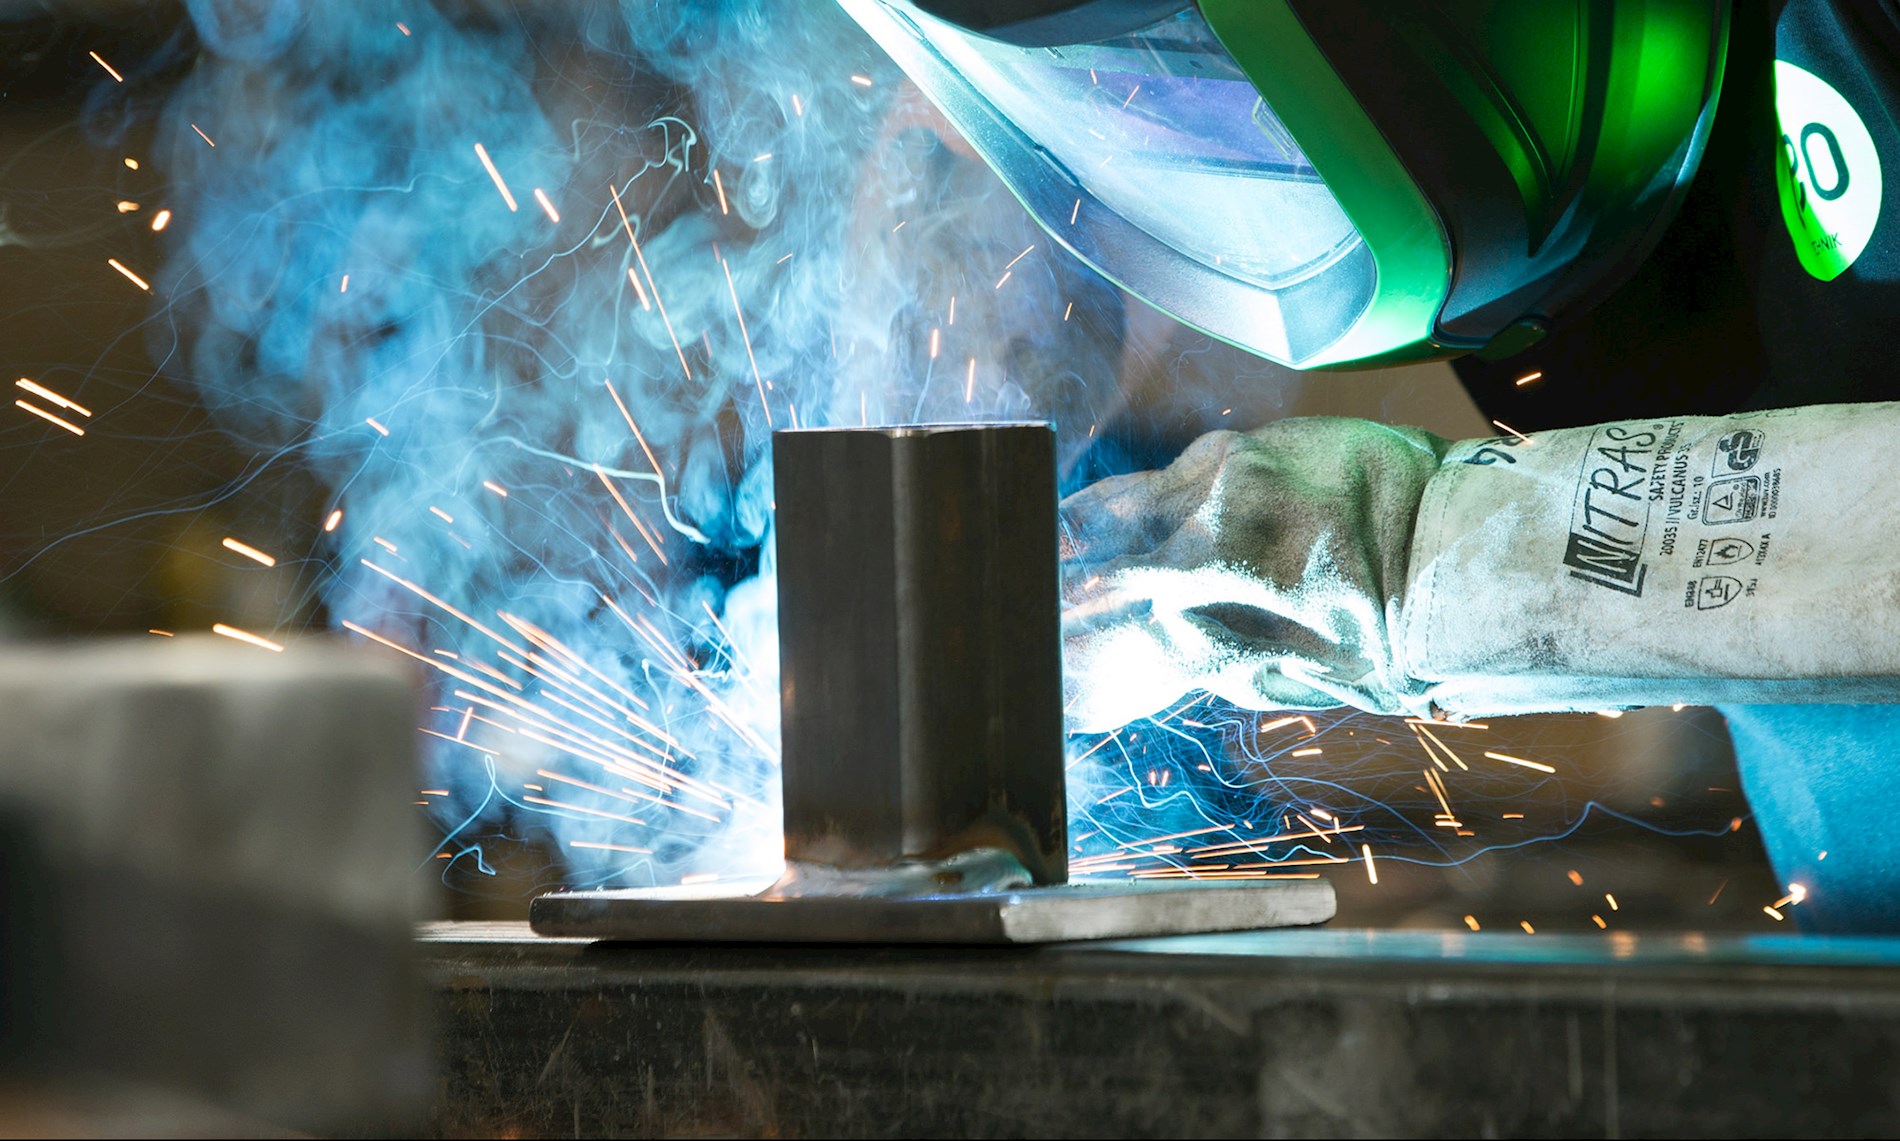 A person is welding in a workshop. He is wearing a face shield to protect the eyes and the face from the bright light.